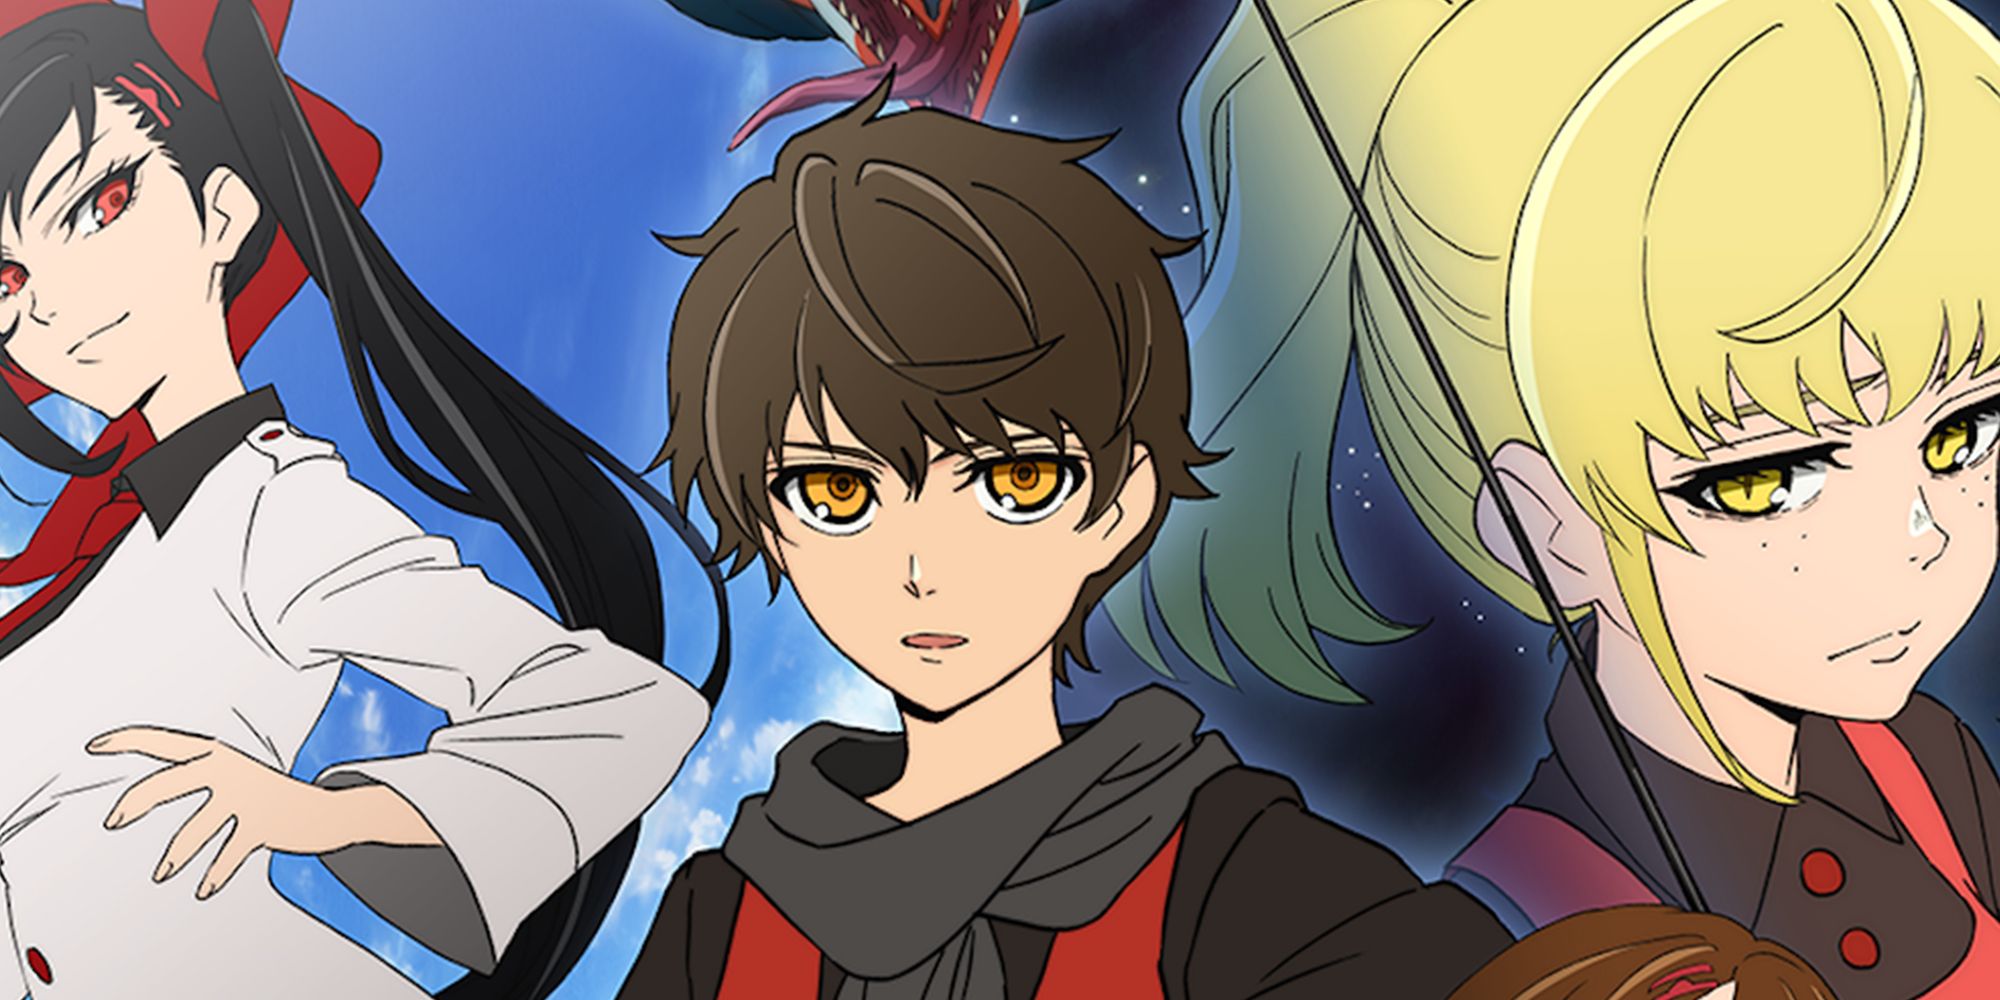 Tower of God- Bam, Jahad, and Rachel All Looking Towards Each Other